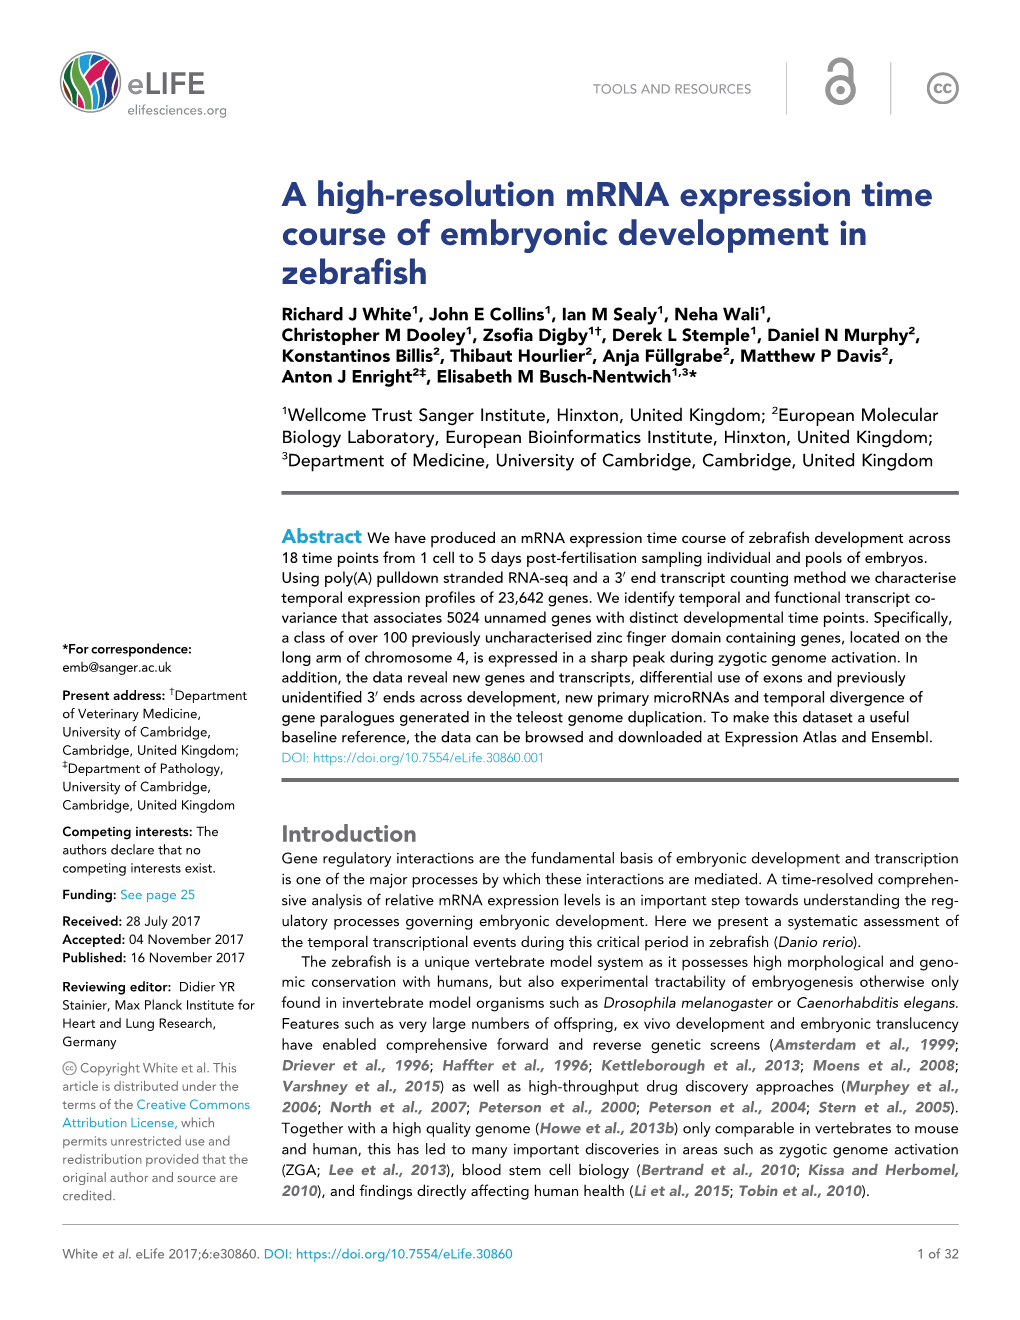 A High-Resolution Mrna Expression Time Course of Embryonic